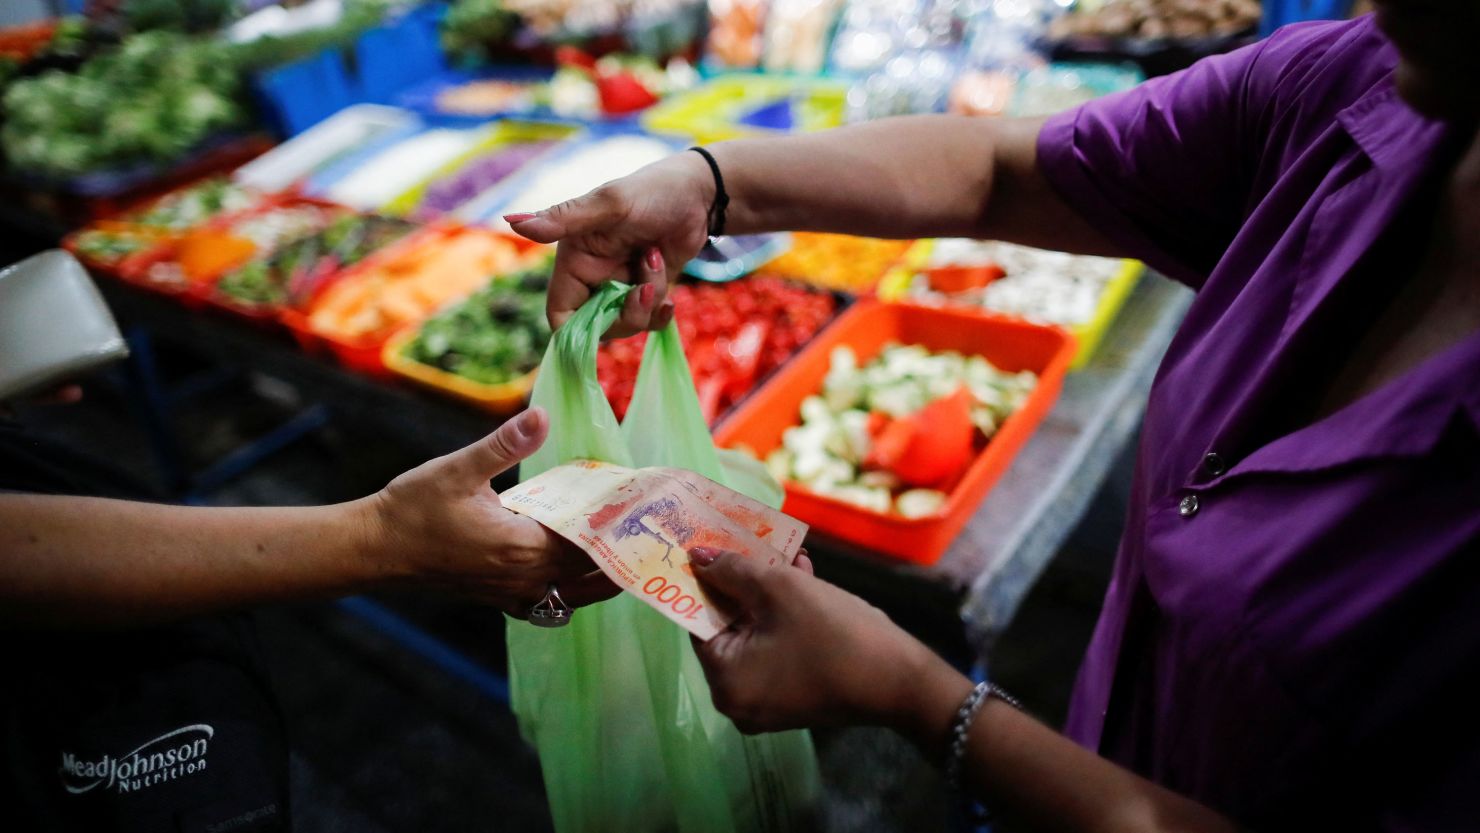 A costumer pays at a greengrocery store in a local market, as Argentina's annual inflation rate tore past 100% in February, the country's statistics agency said on Tuesday, the first time it has hit triple figures since a period of hyperinflation in 1991, over three decades ago, in Buenos Aires, Argentina March 14, 2023. REUTERS/Agustin Marcarian